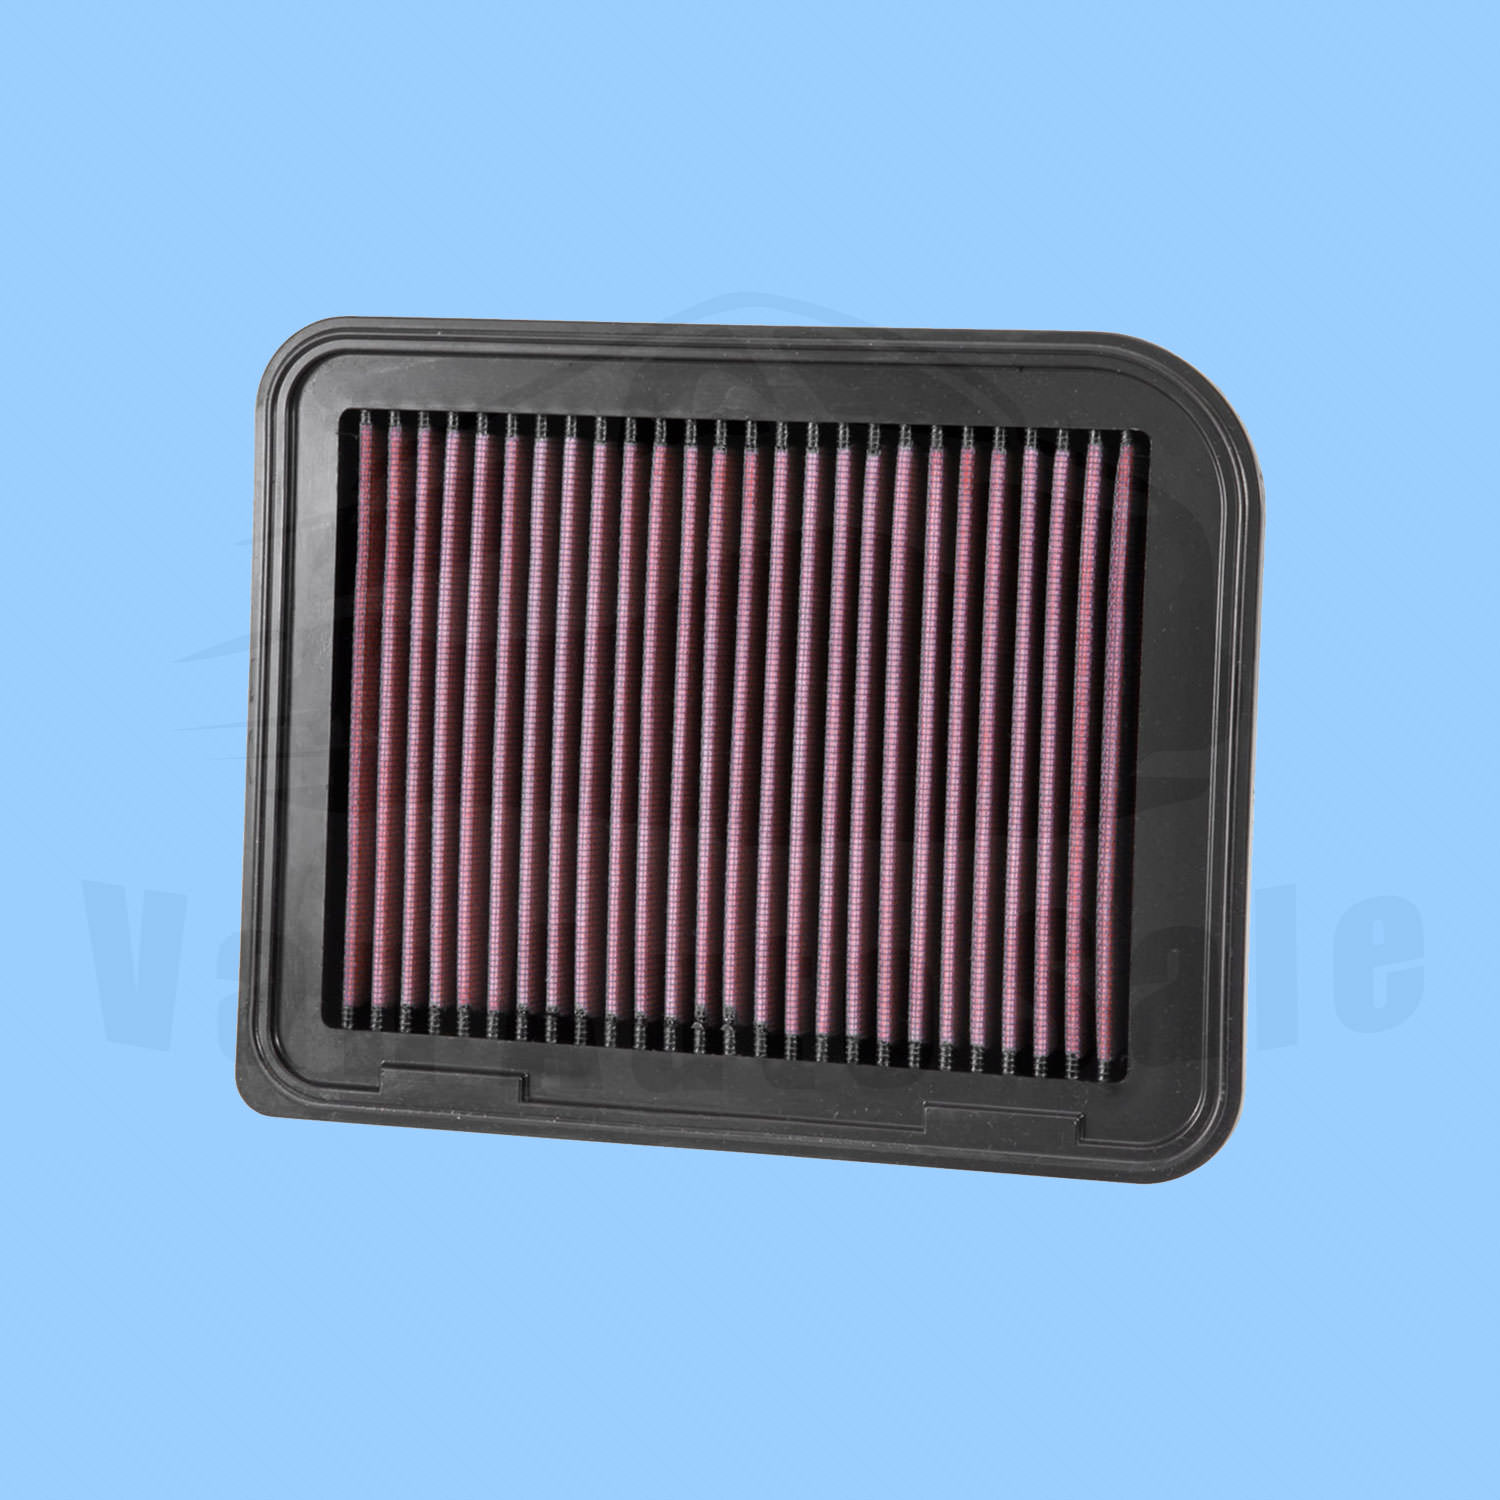 Replacement Air Filter K&N for Mitsubishi Outlander 2014-2020 | eBay 2014 Mitsubishi Outlander Sport Cabin Air Filter